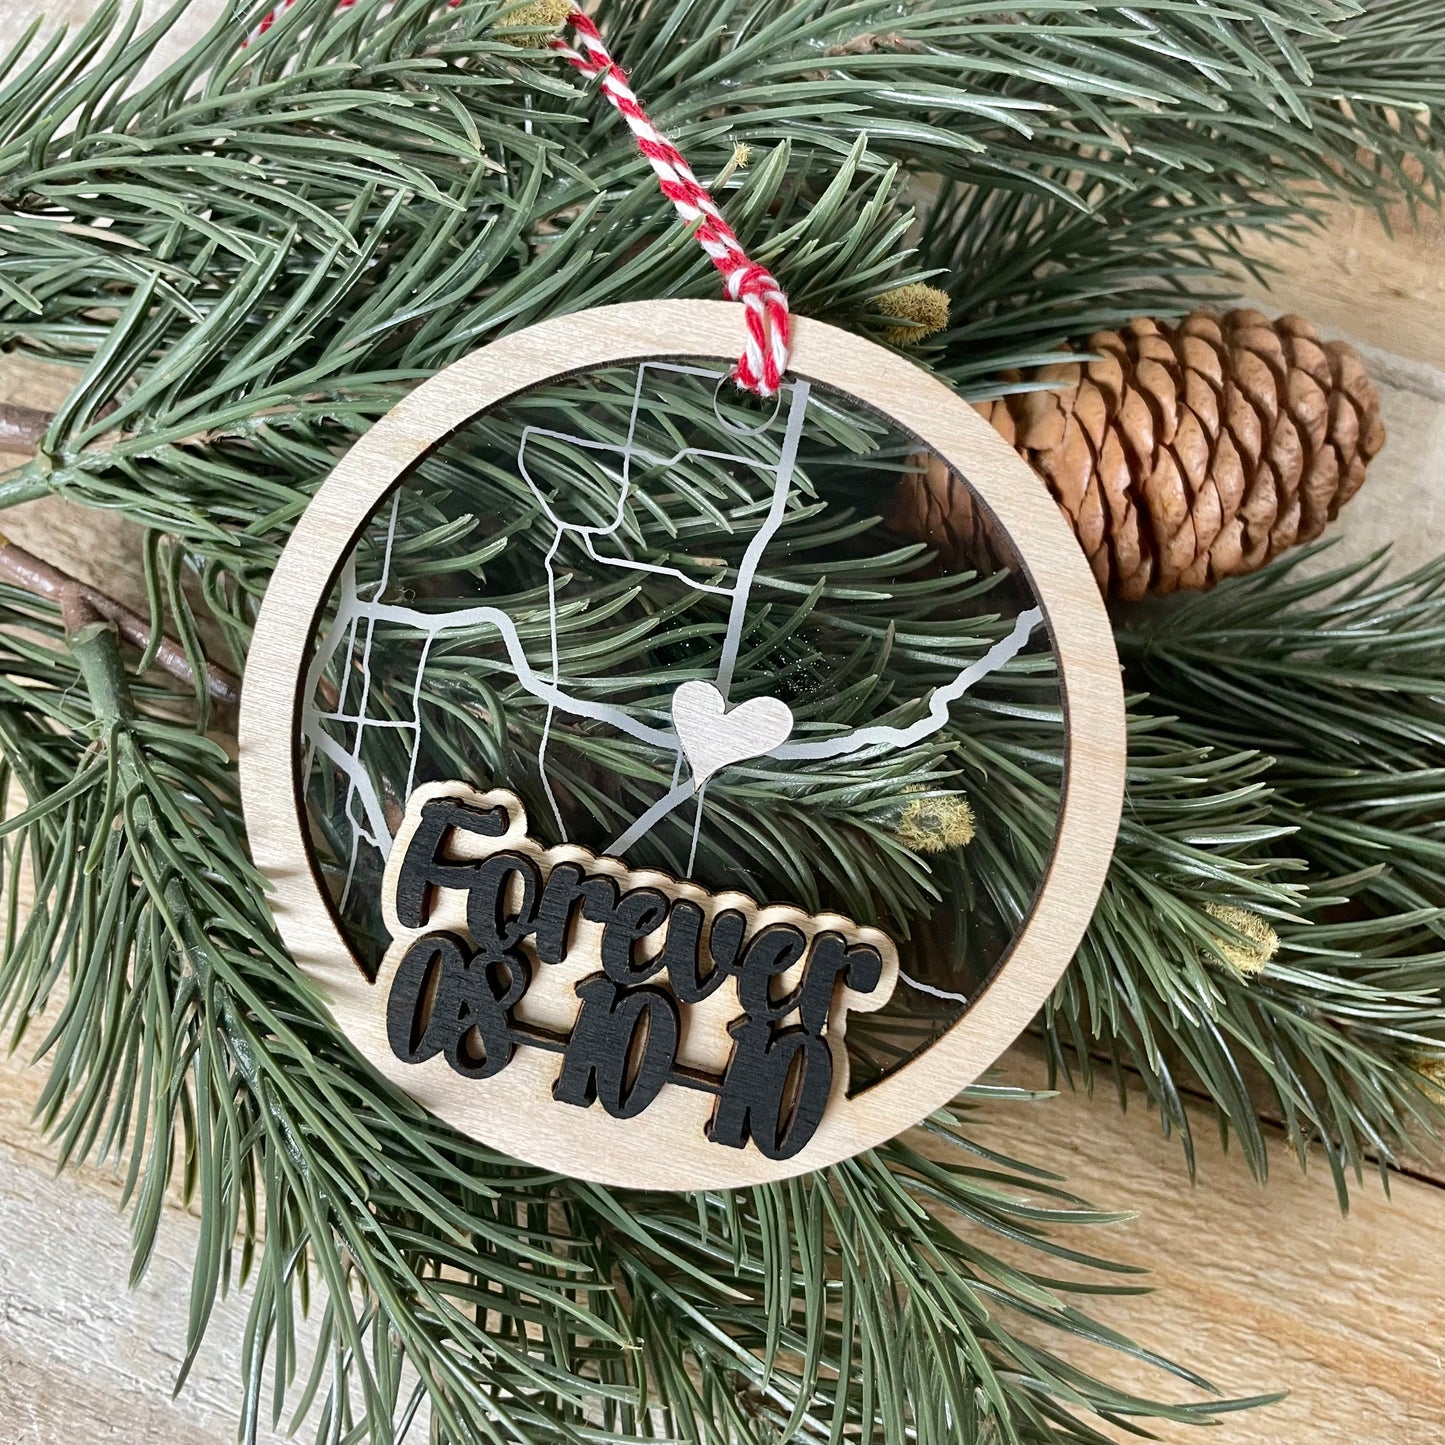 Map ornament with acrylic and wood, has wedding dates